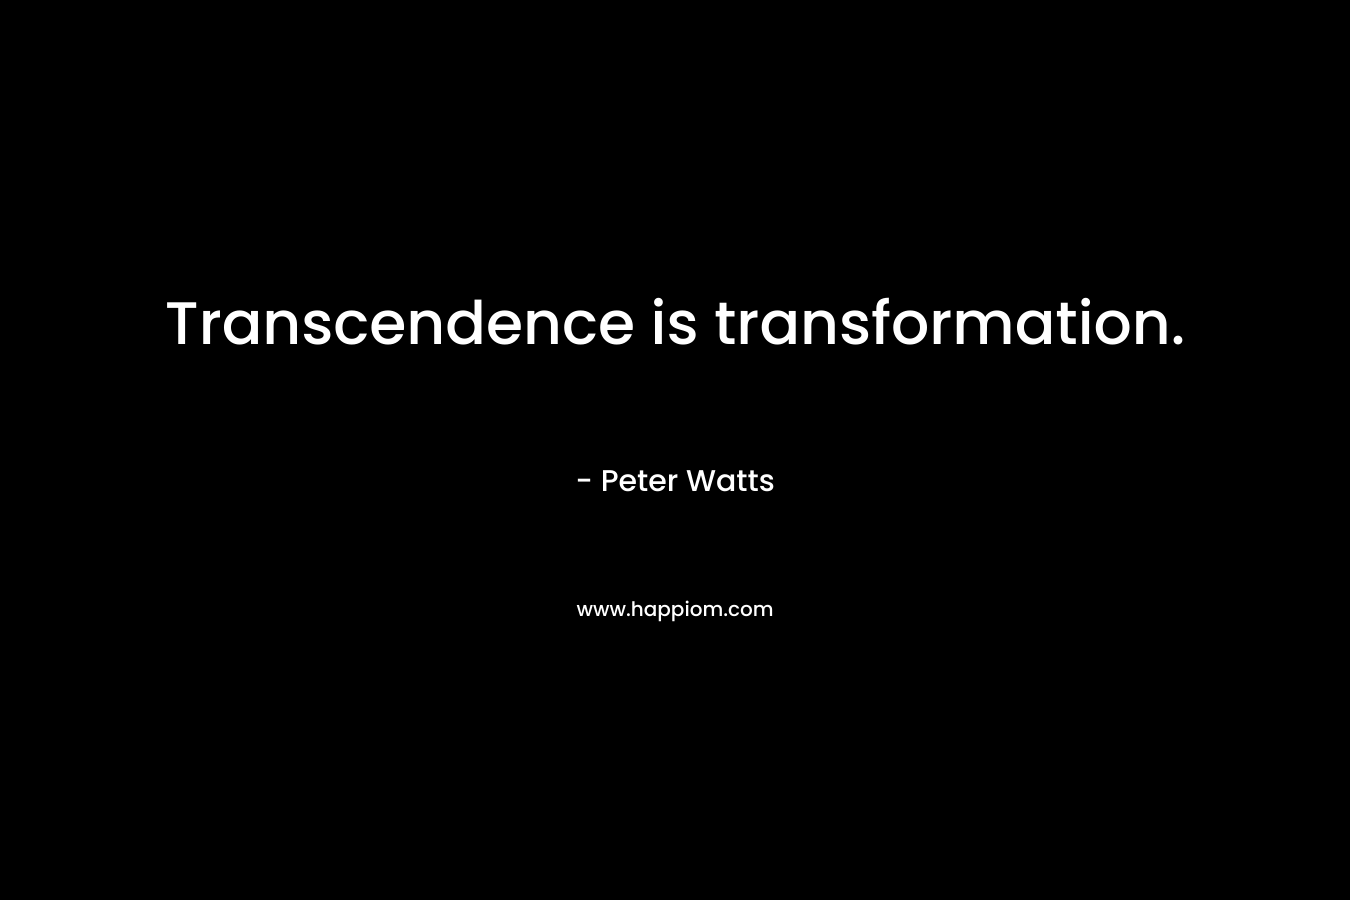 Transcendence is transformation. – Peter Watts